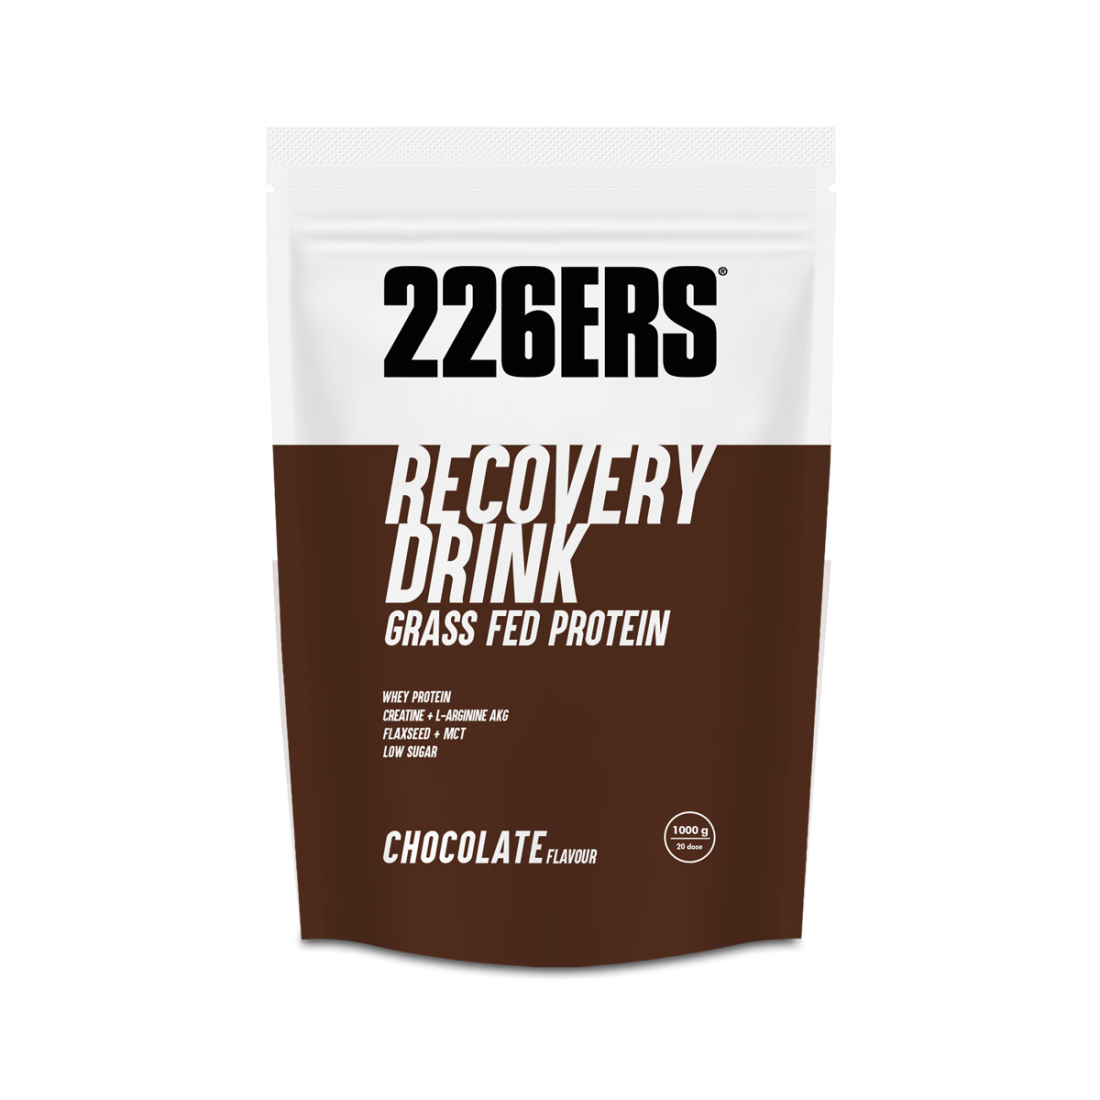 RECOVERY DRINK - Protein Grass Fed -...